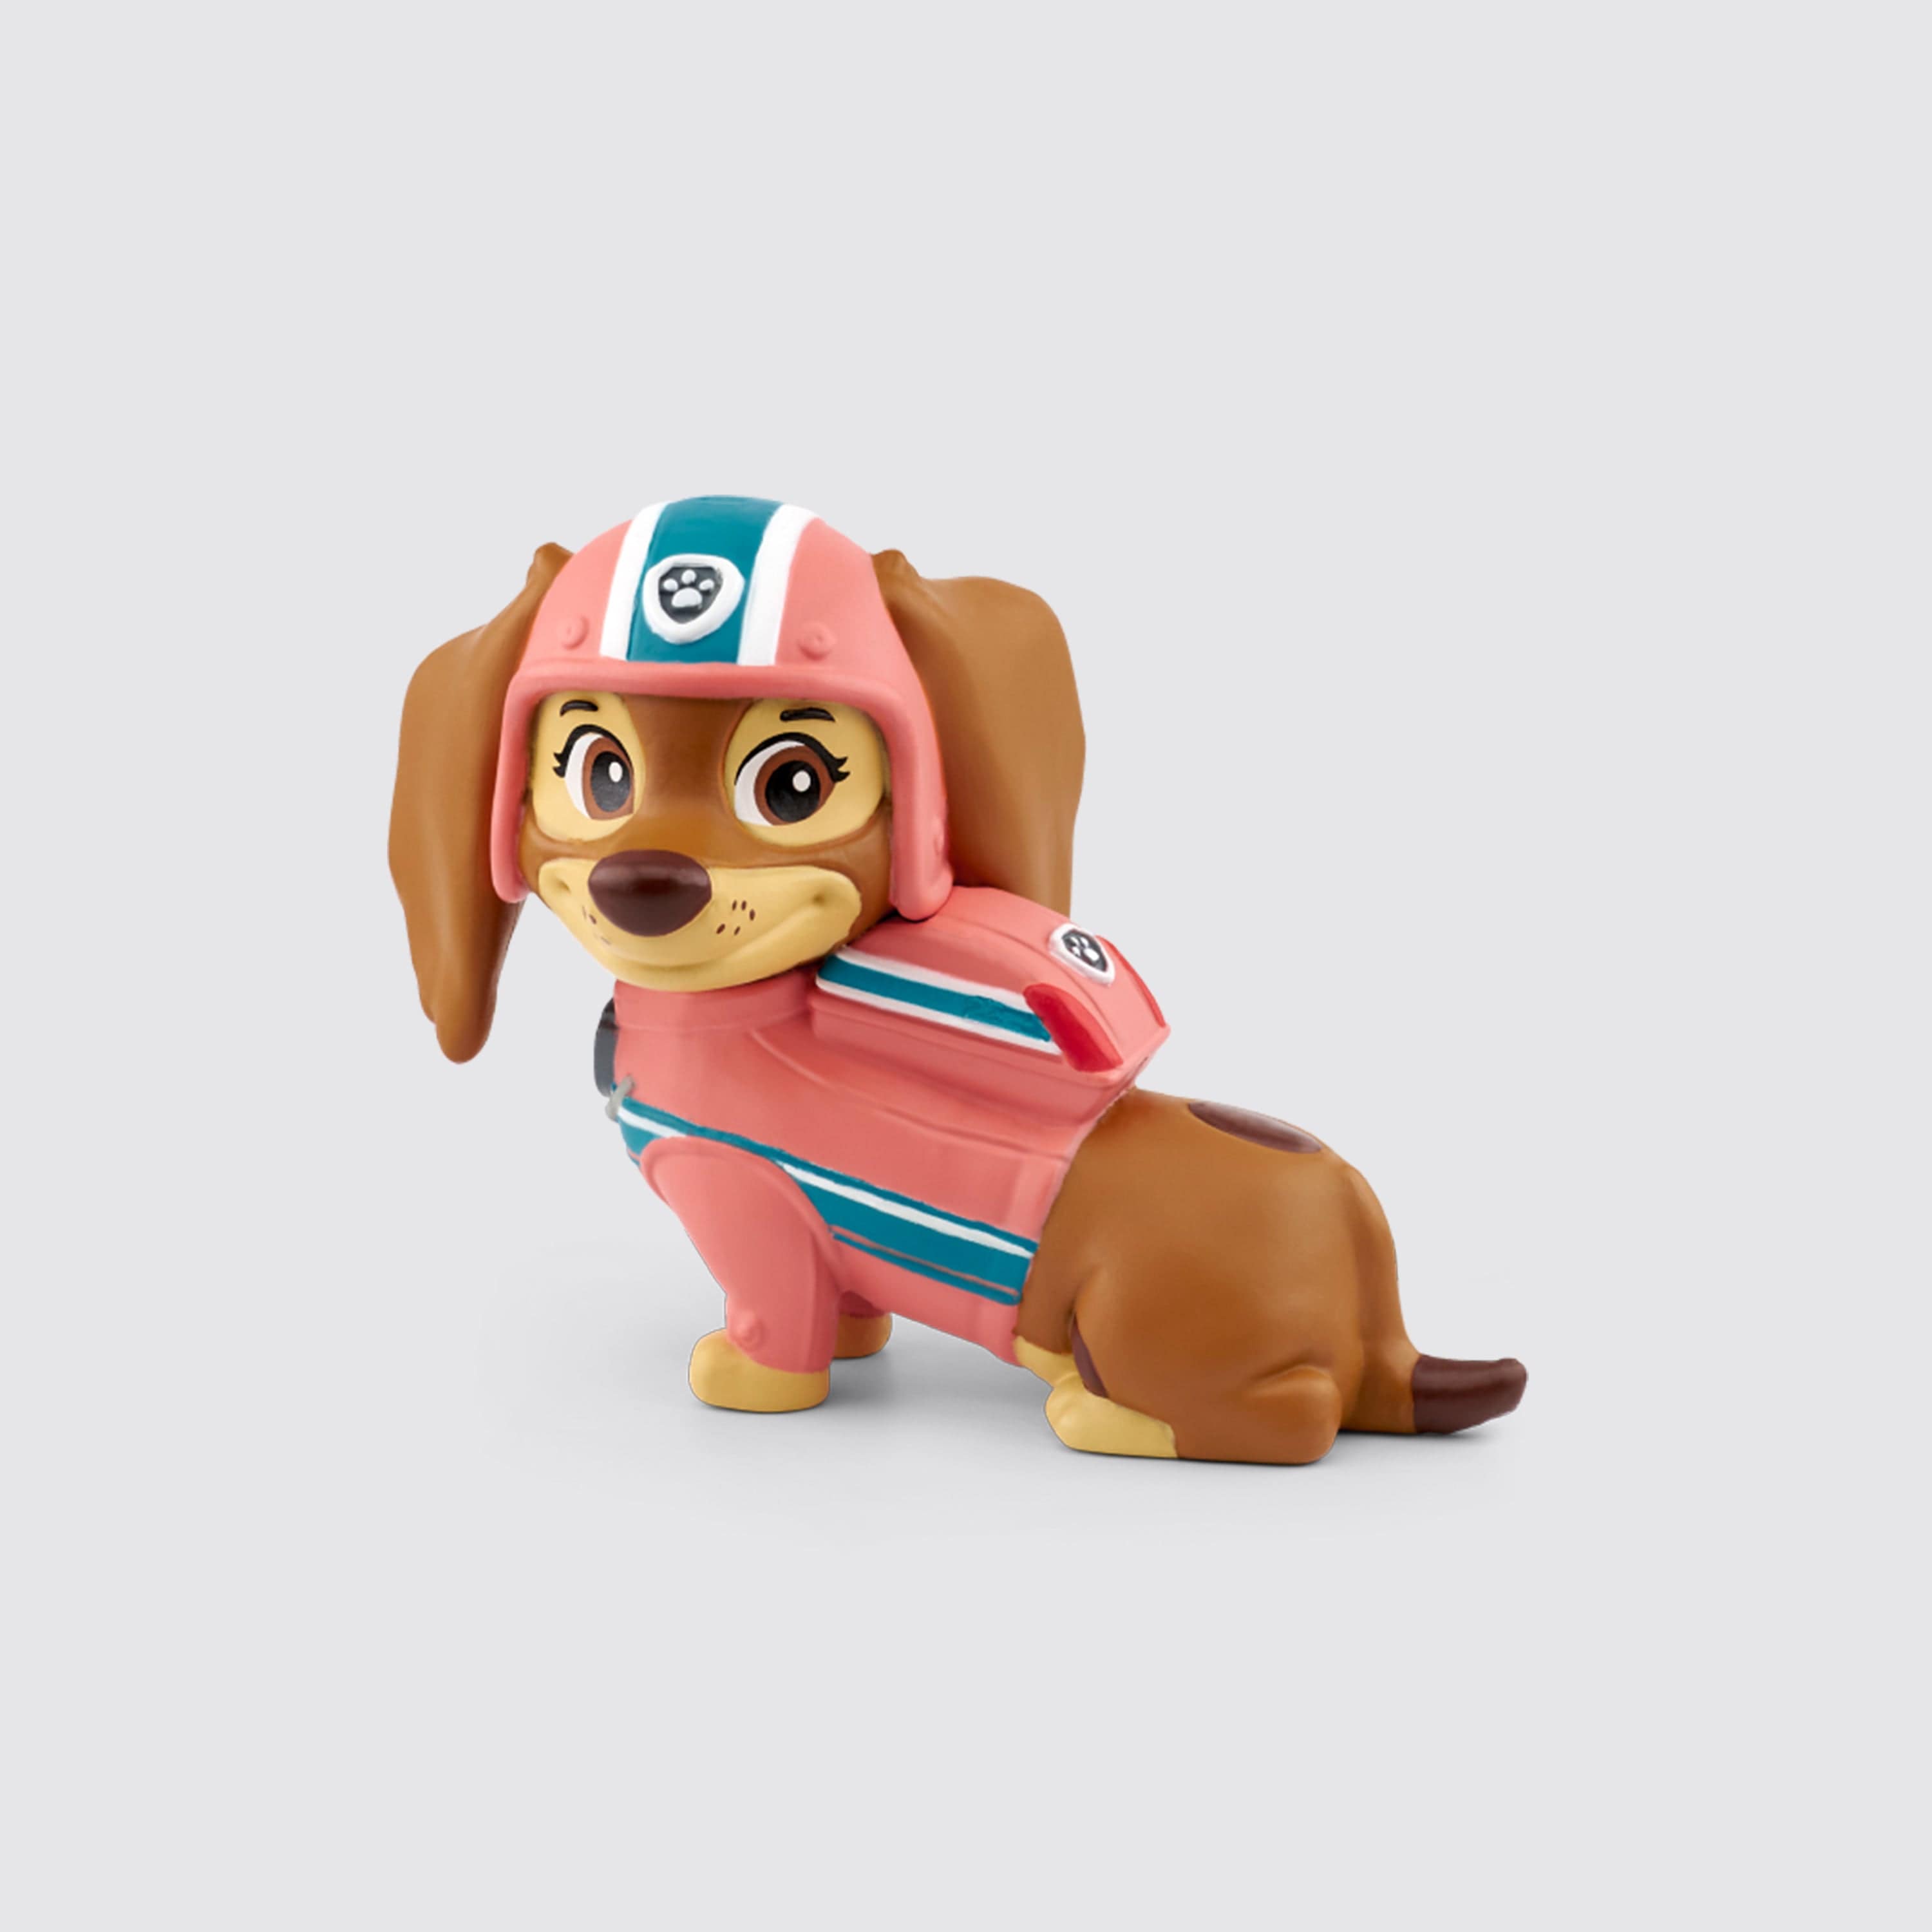 Tonies Tracker Audio Play Character from Paw Patrol